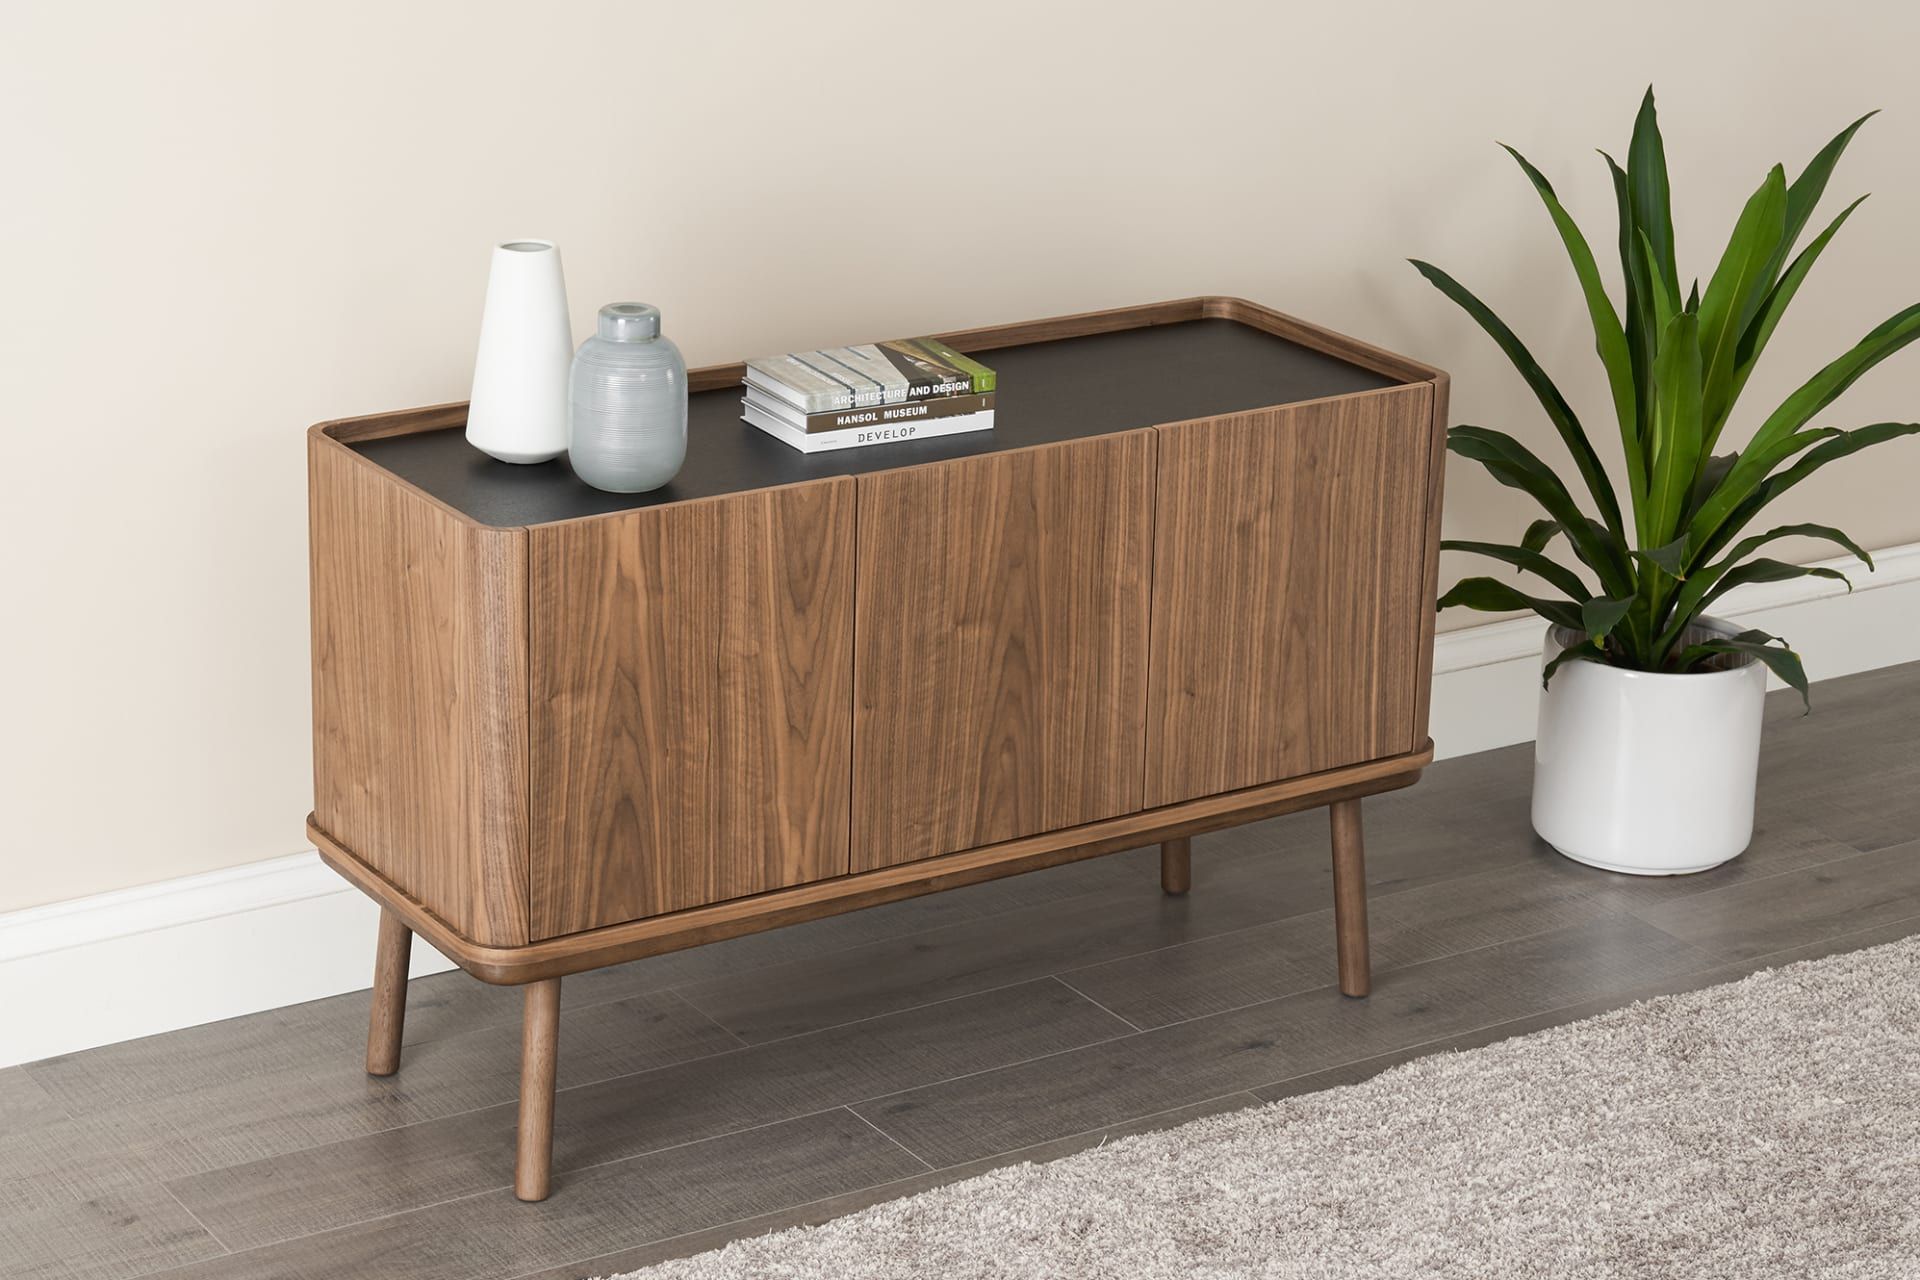 What'S The Difference Between A Sideboard, A Credenza And A Buffet?